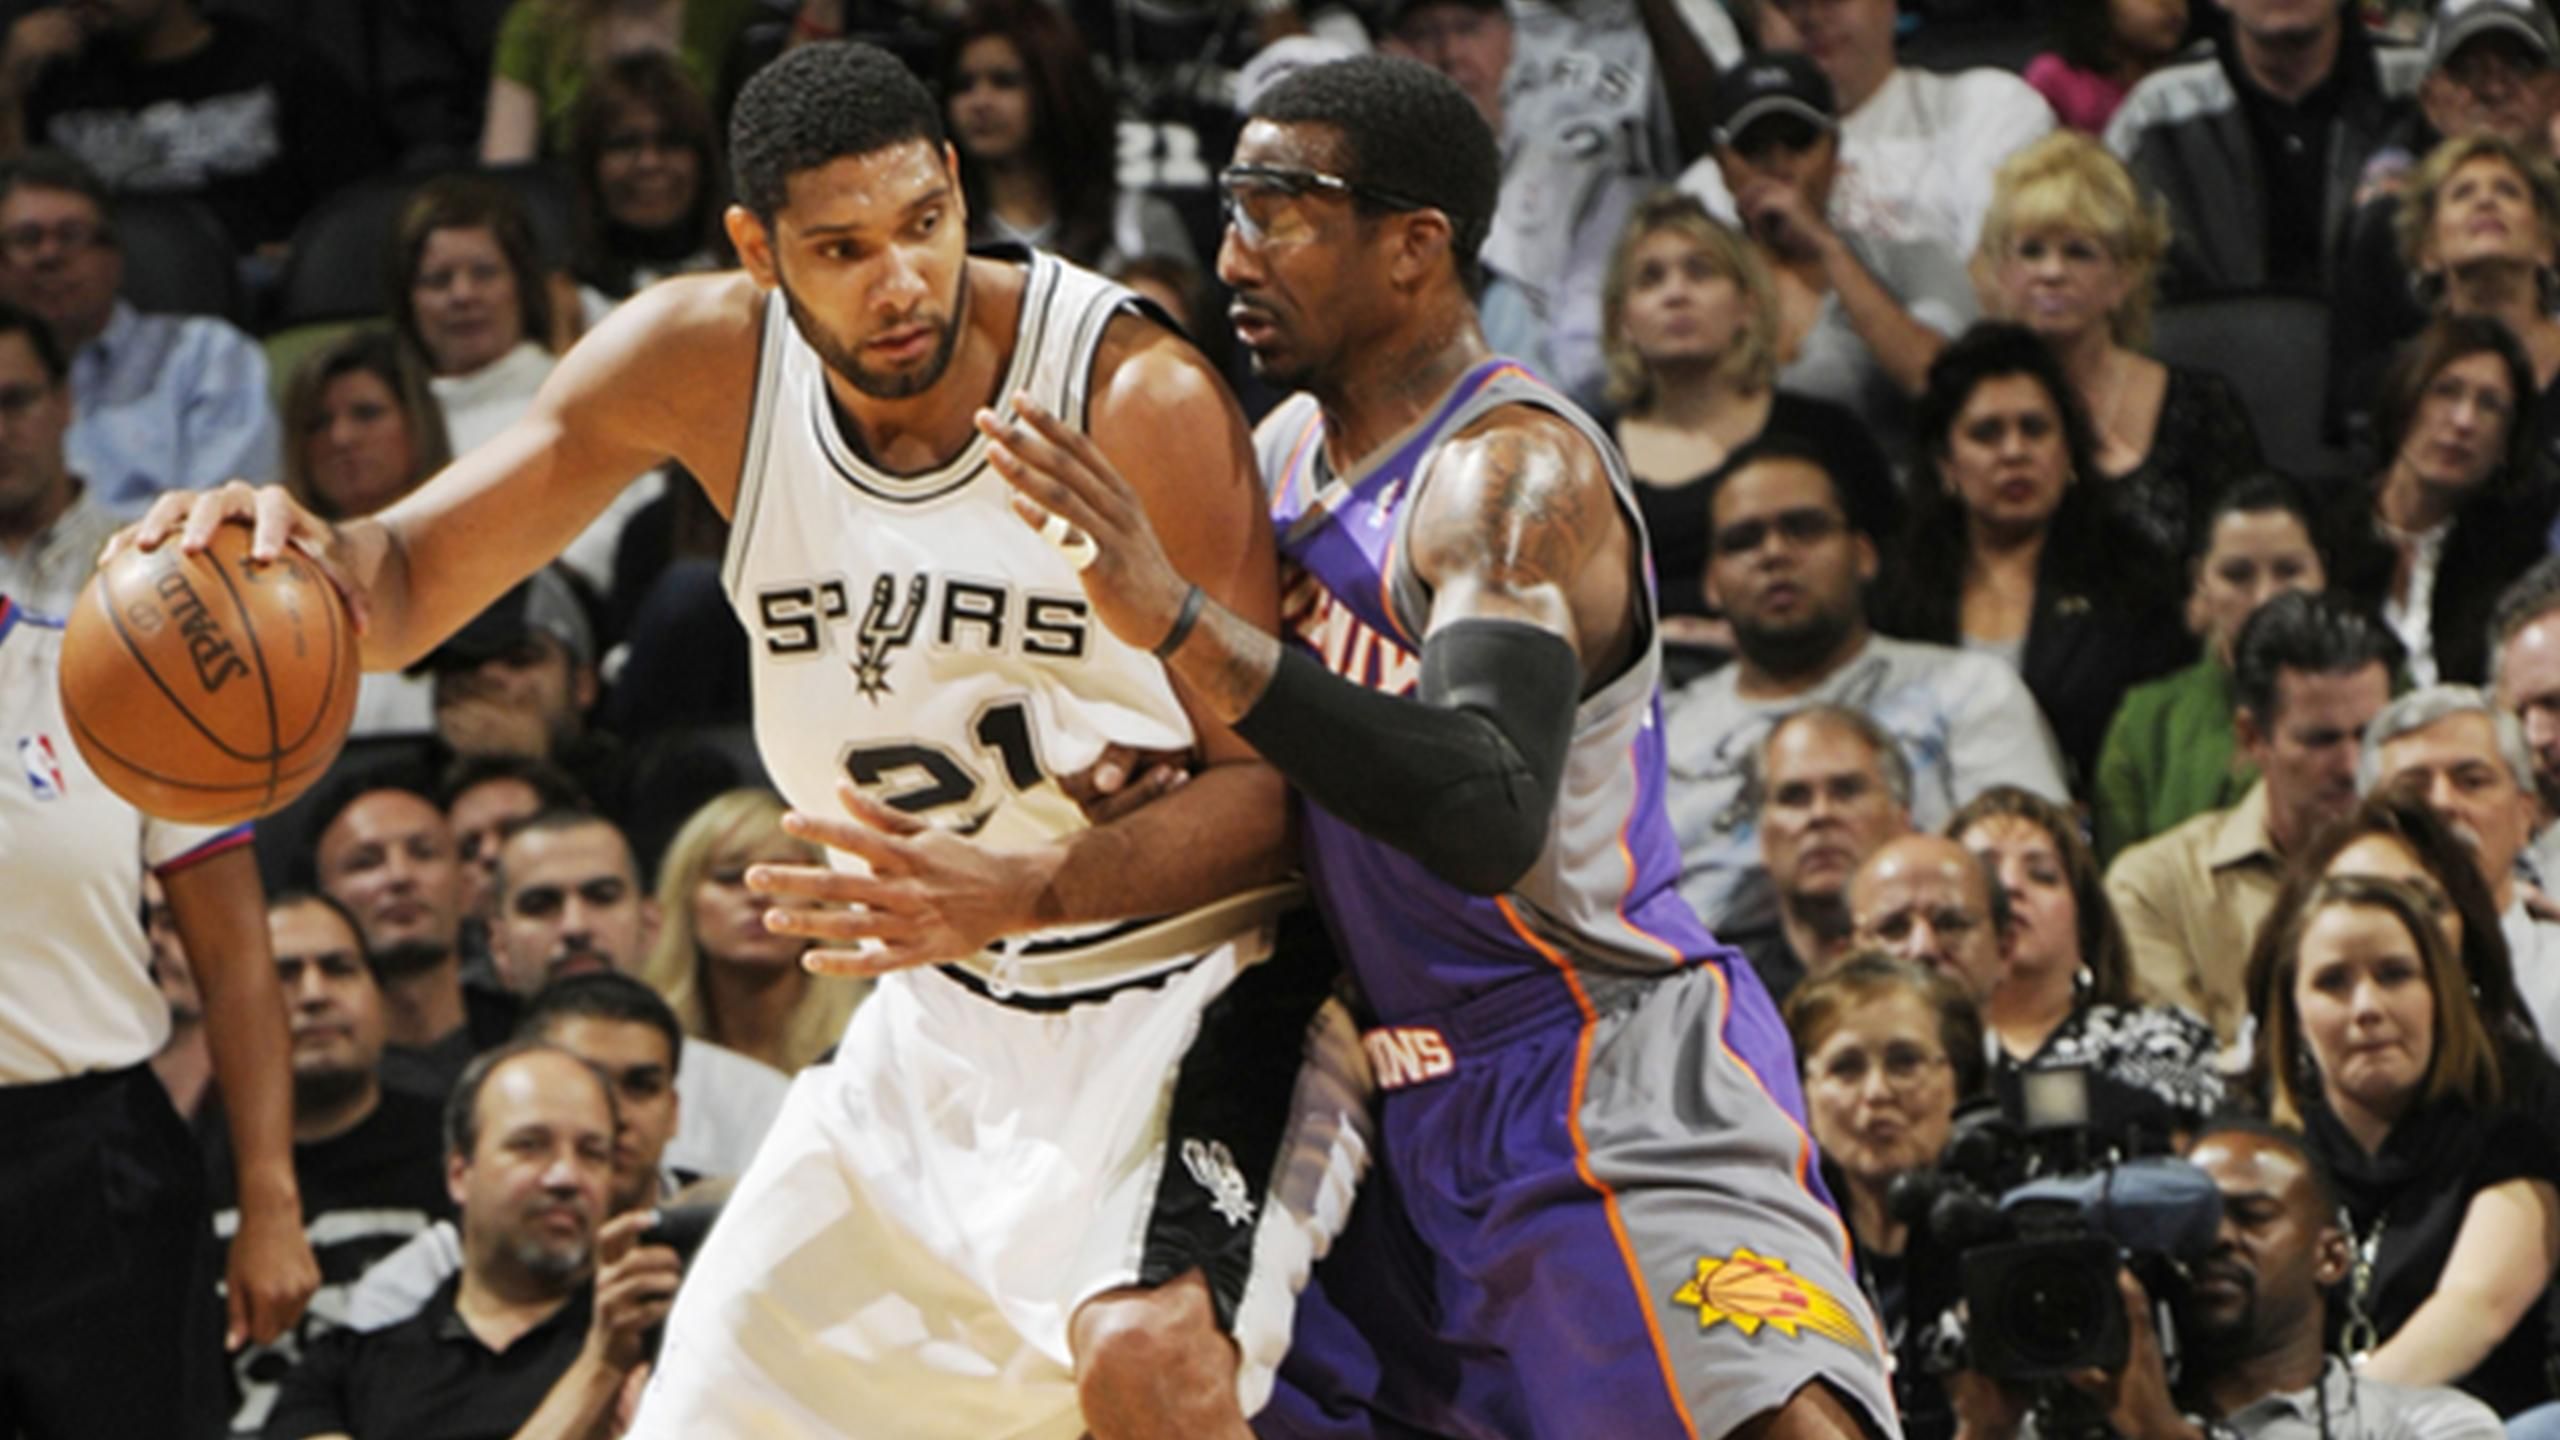 Tim Duncan Wallpapers HD - Apps on Google Play